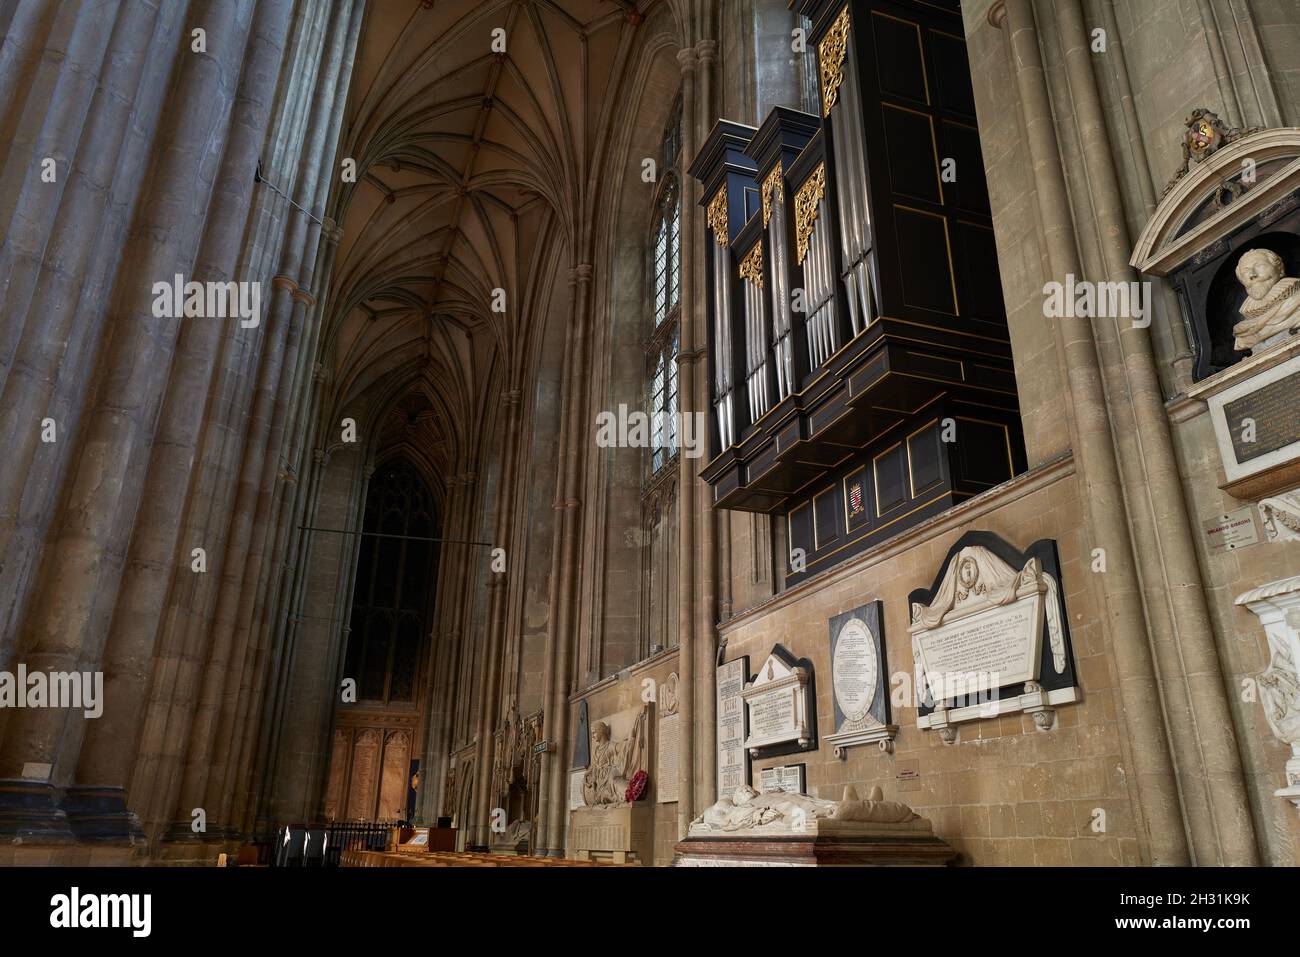 Organ on wall of the north aisle next the nave at Canterbury cathedral, England. Stock Photo